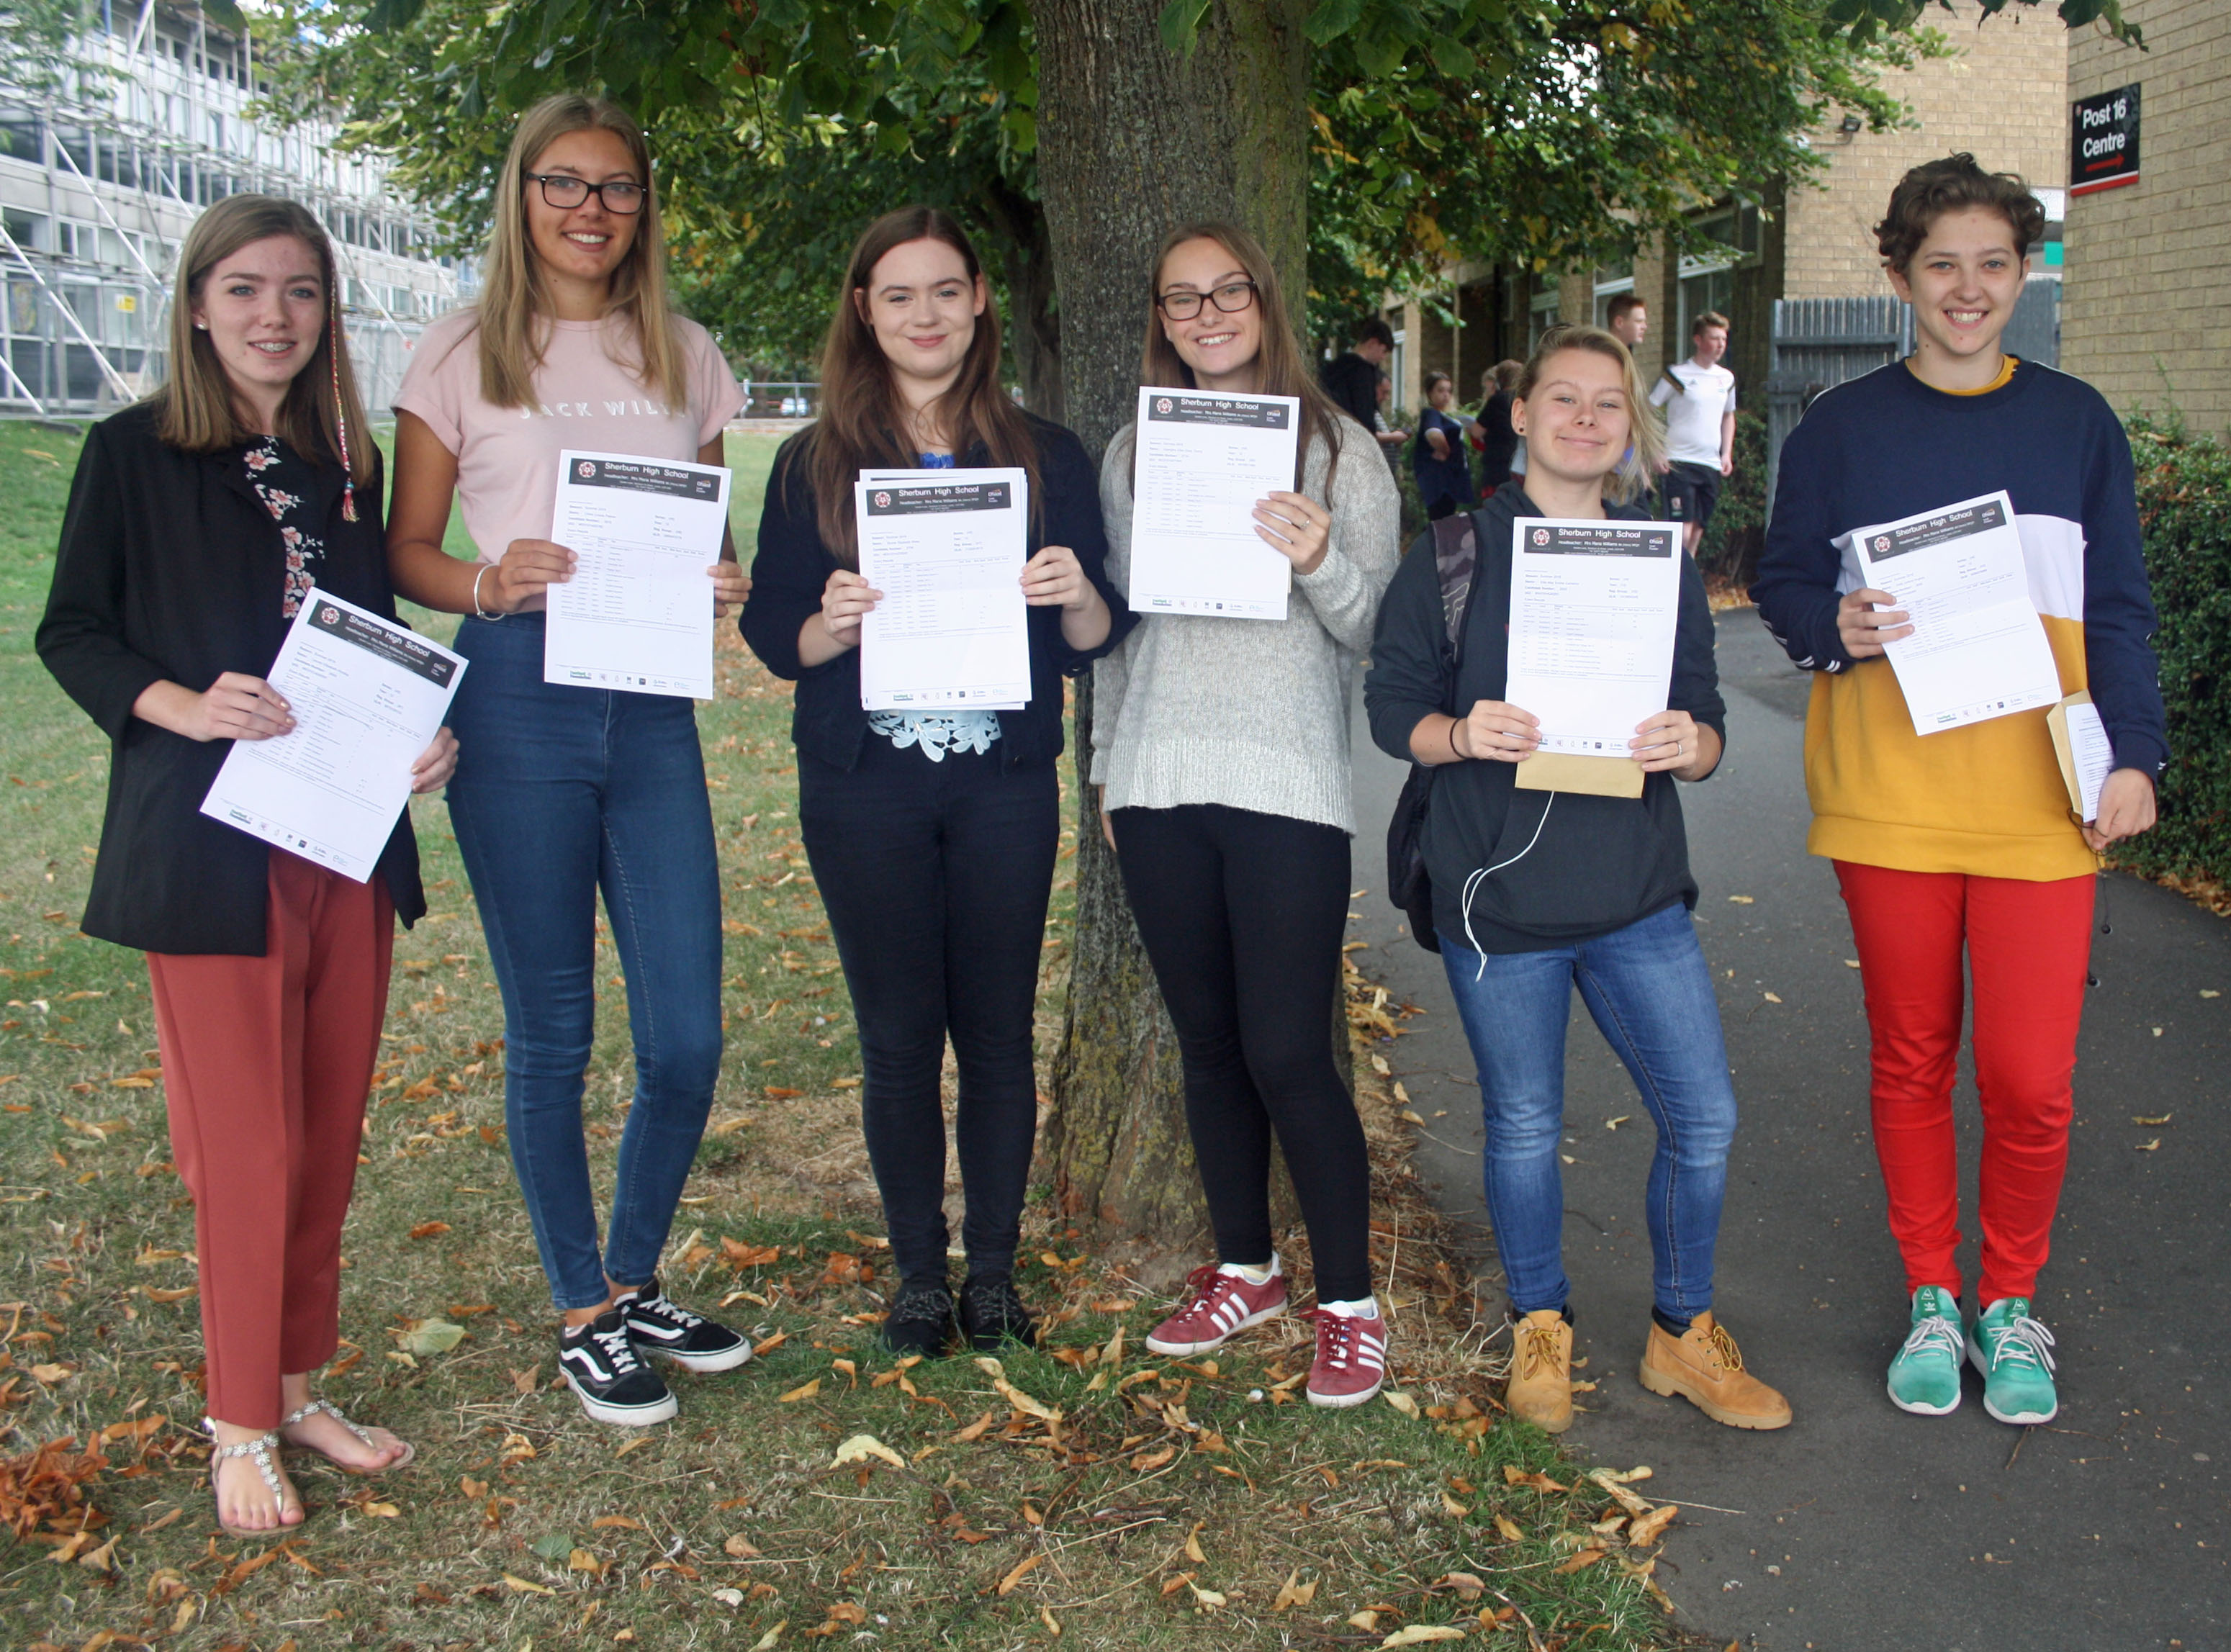 Sherburn High School 2018 Results: Outstanding Results!